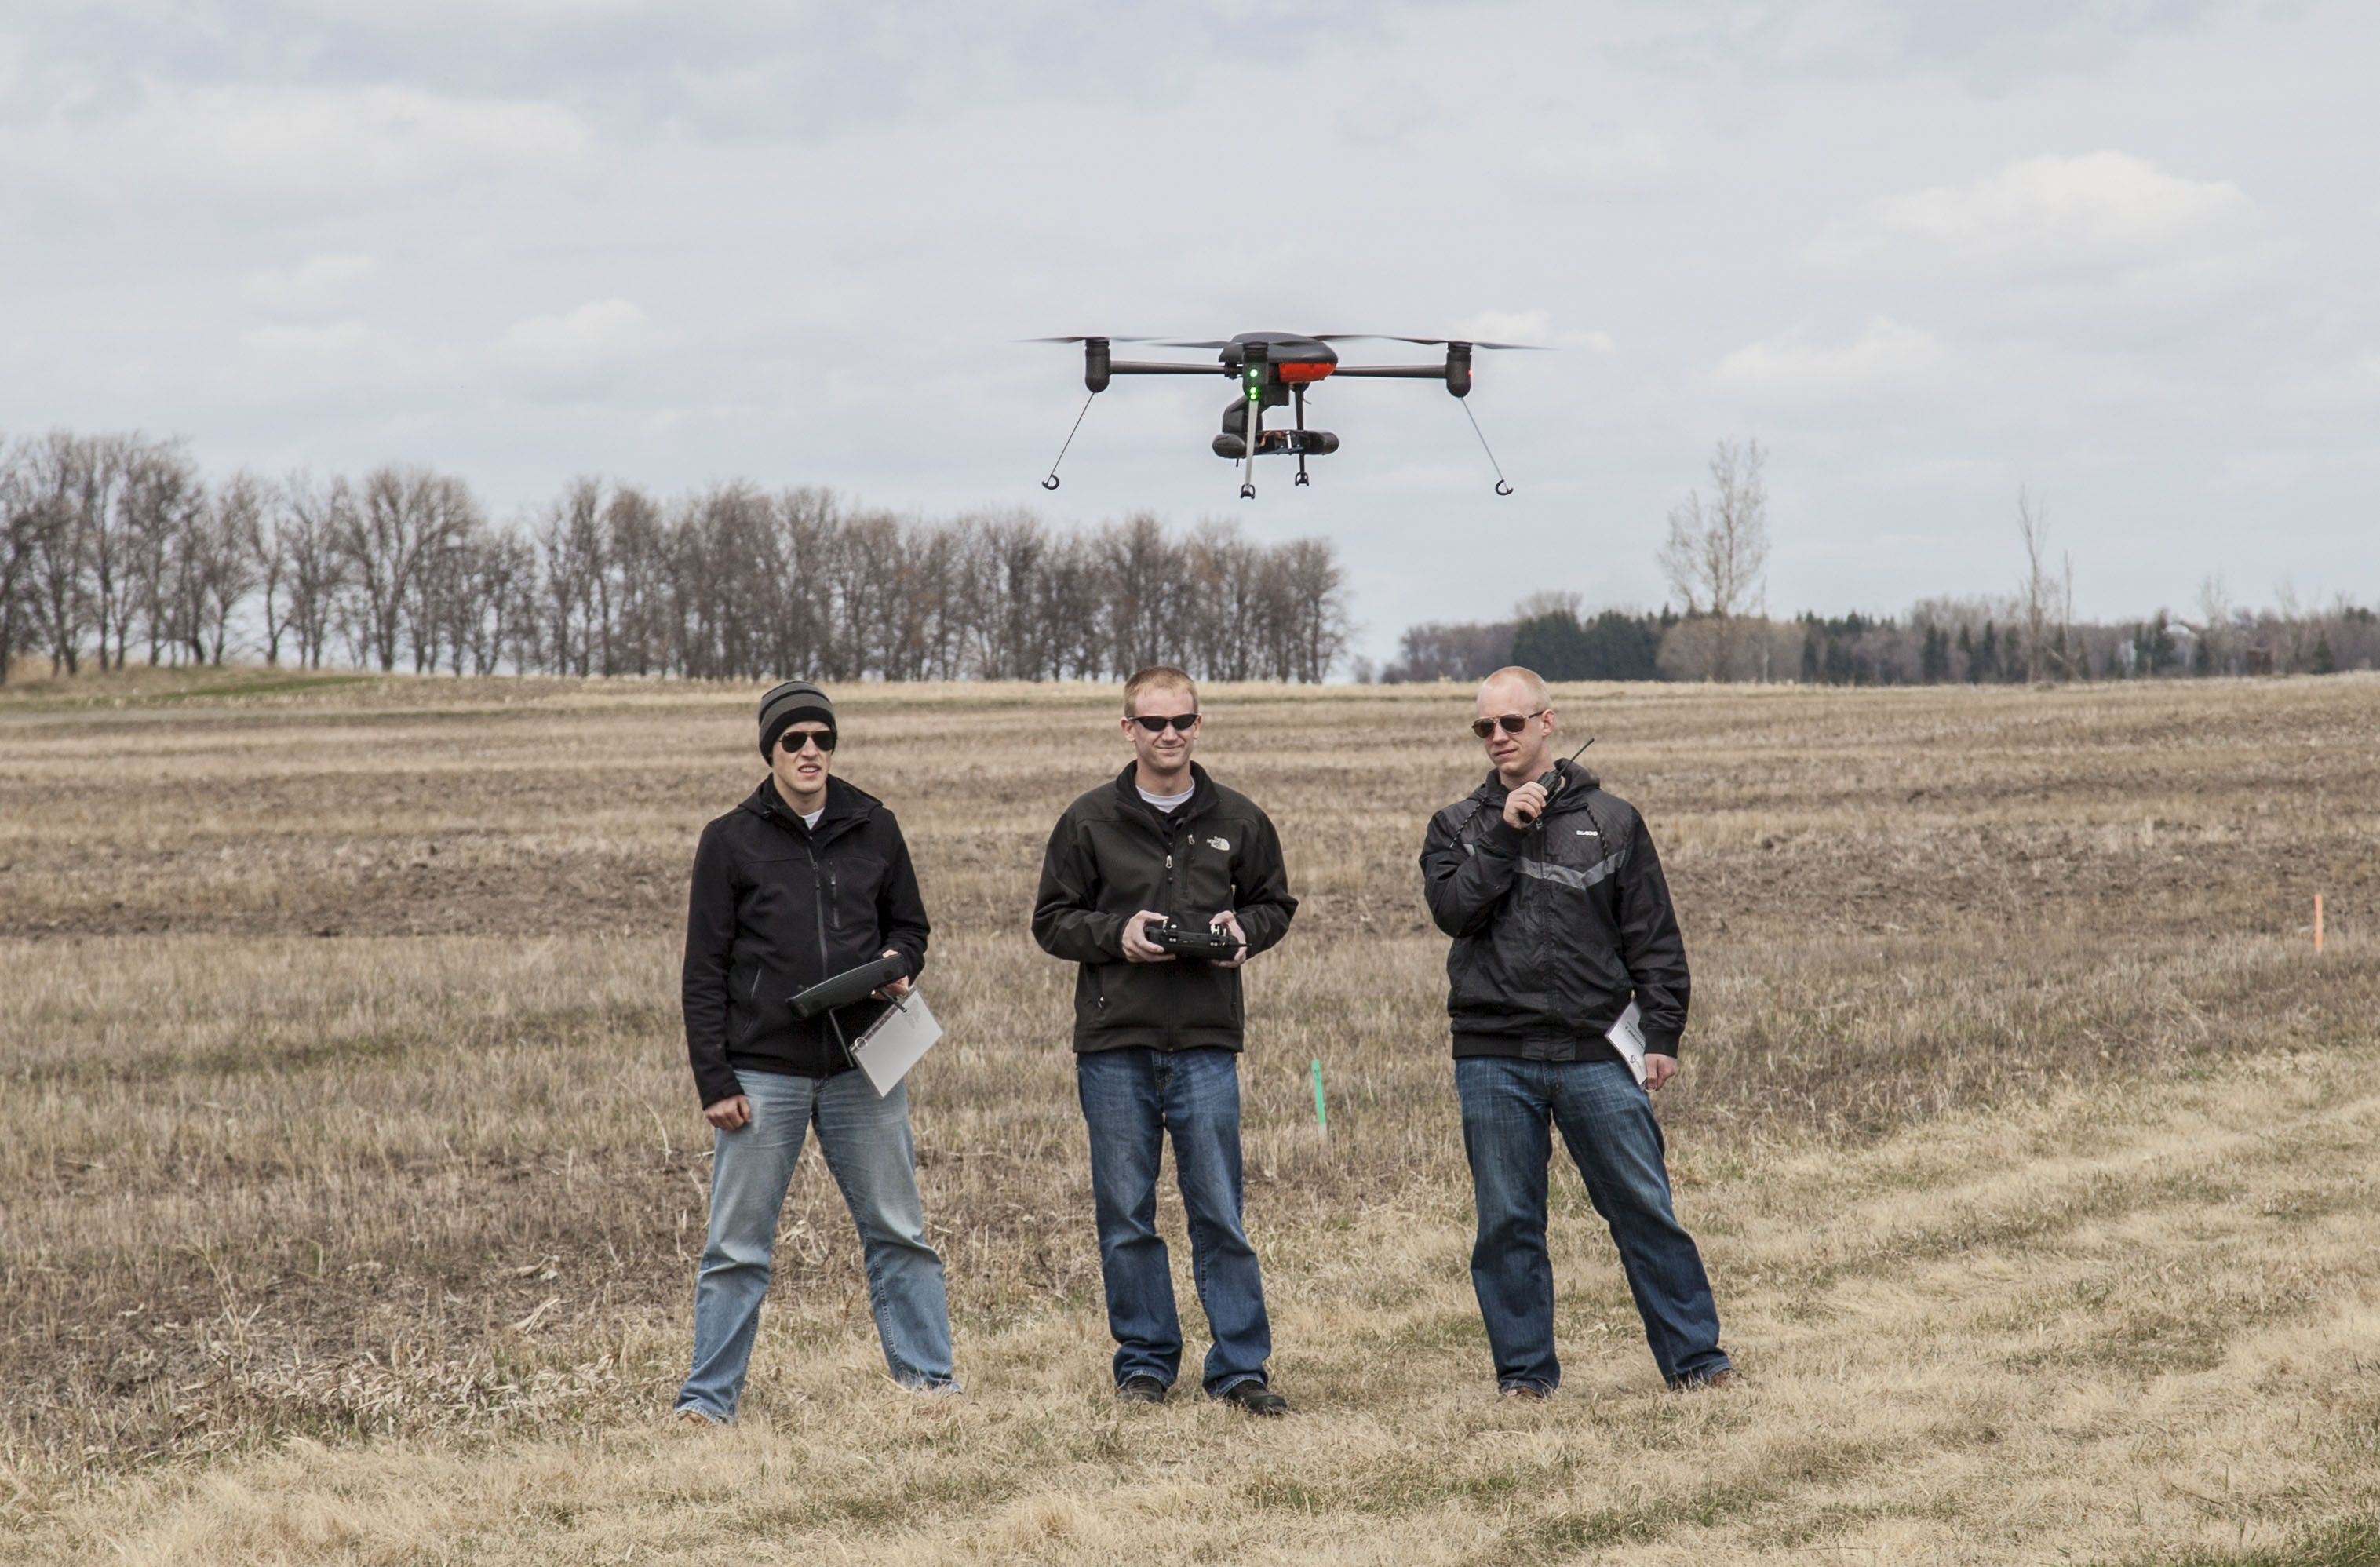 Jakee Stoltz (left), Trevor Woods (center) and Logan Lass of UND's Center for Unmanned Aircraft Systems Research, Education and Training are conducting a test flight of an unmanned aircraft system as part of a research project at NDSU's Carrington Research Extension Center. (NDSU photo)